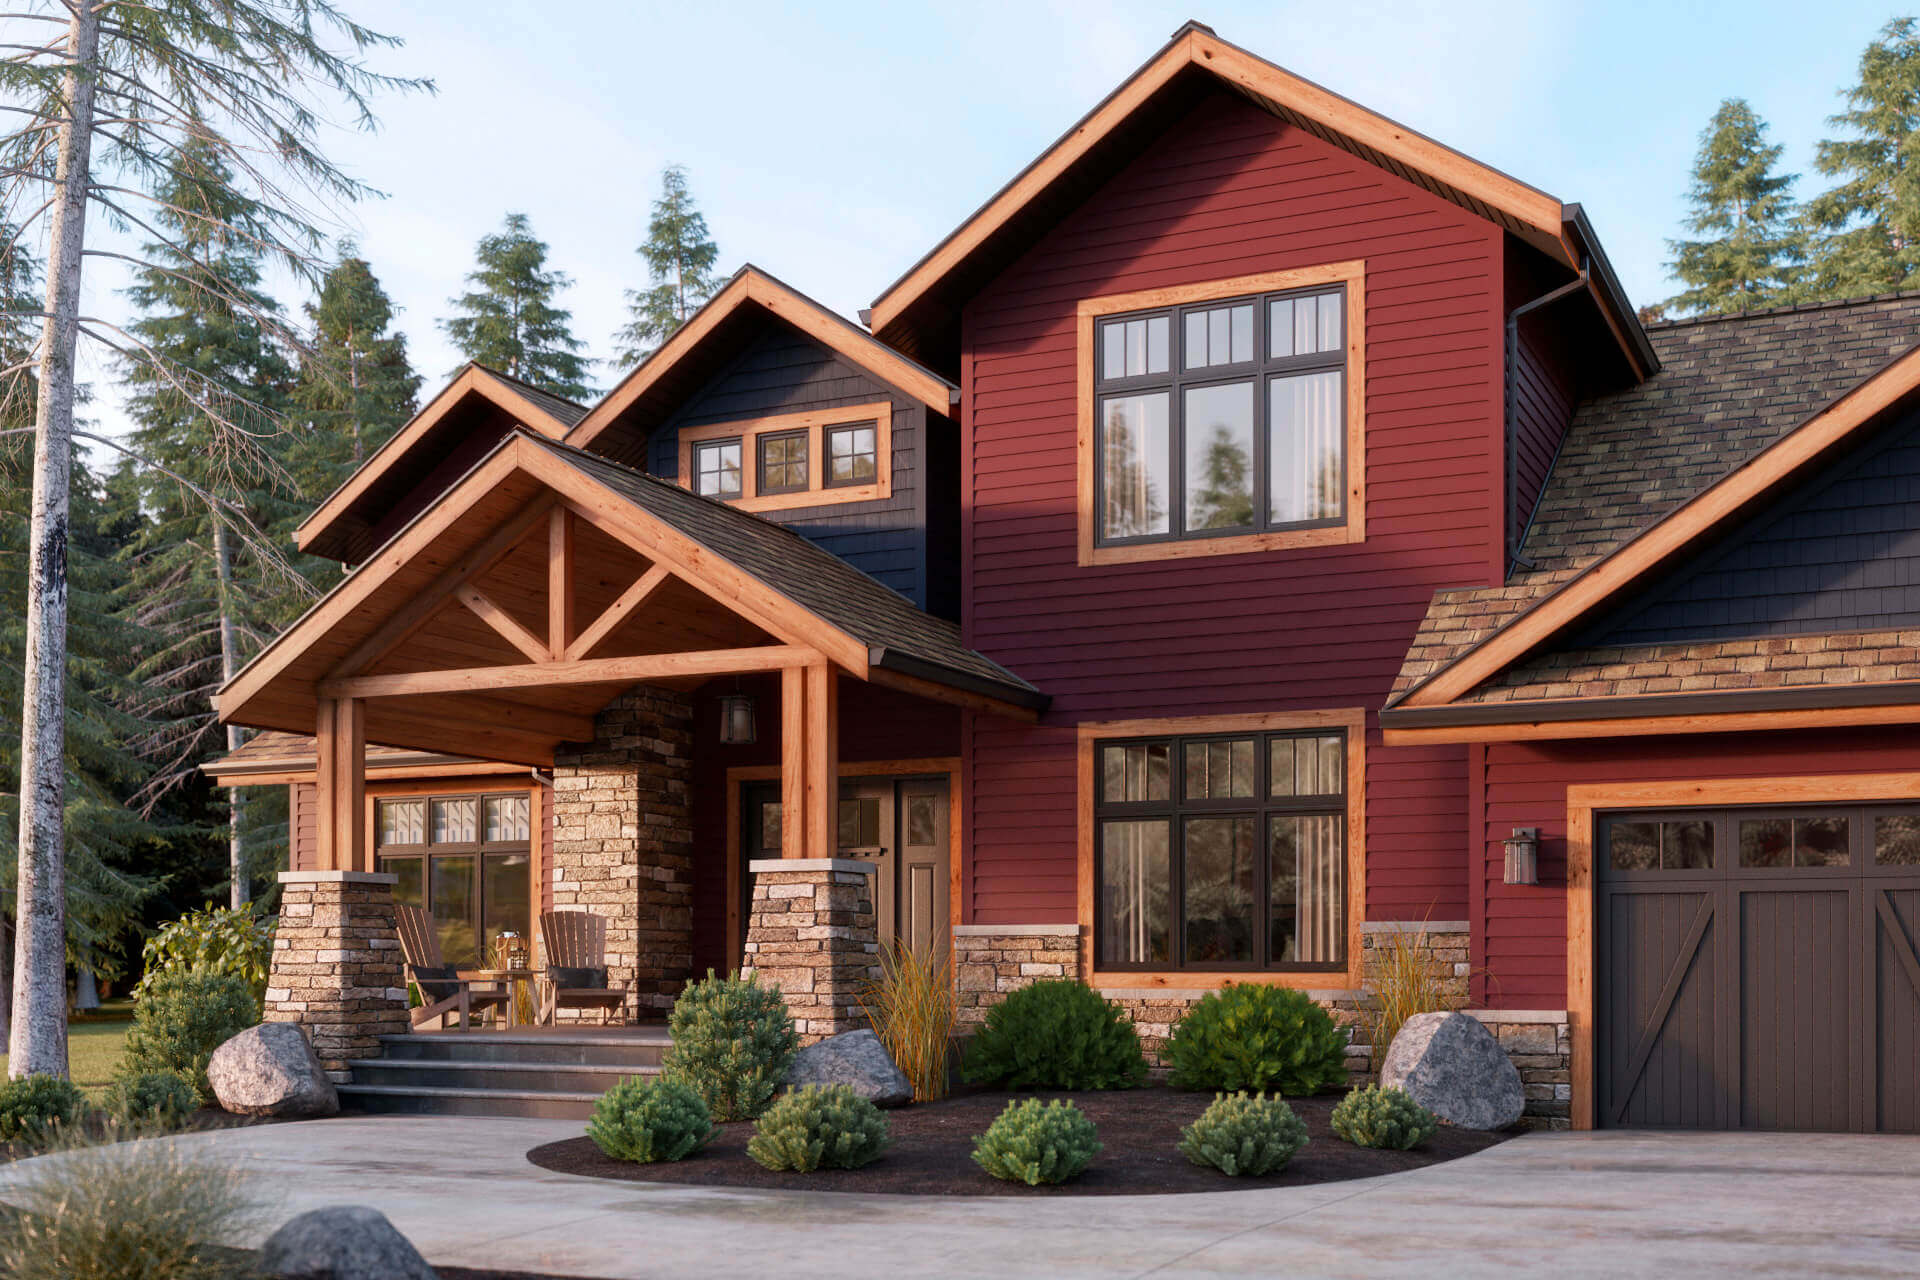 7 Best House Siding Options from BudgetFriendly to HighEnd